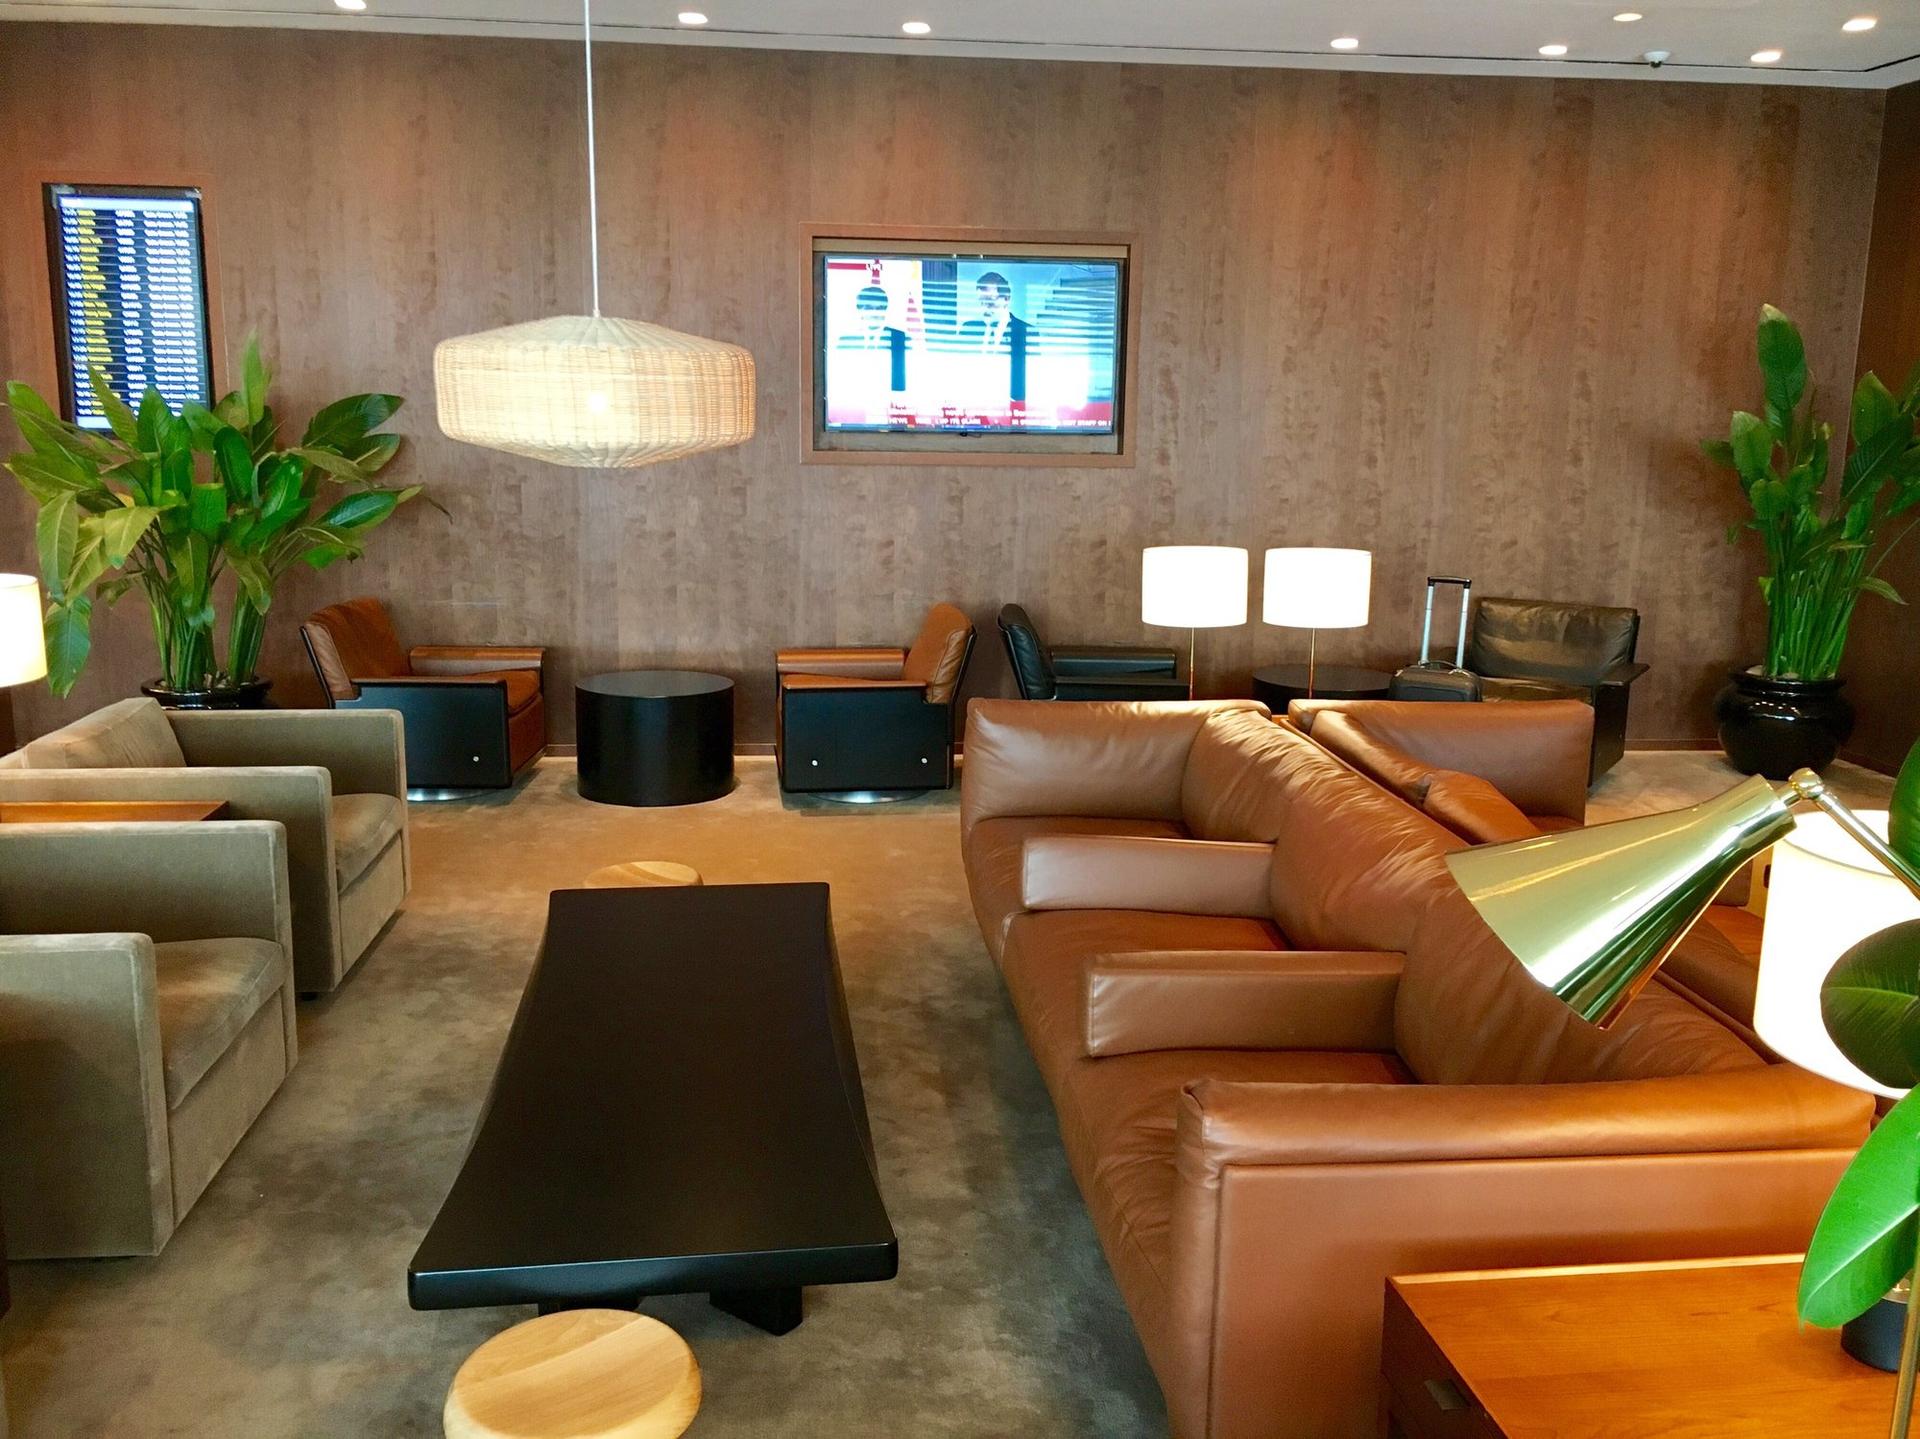 Cathay Pacific Business Class Lounge image 9 of 48